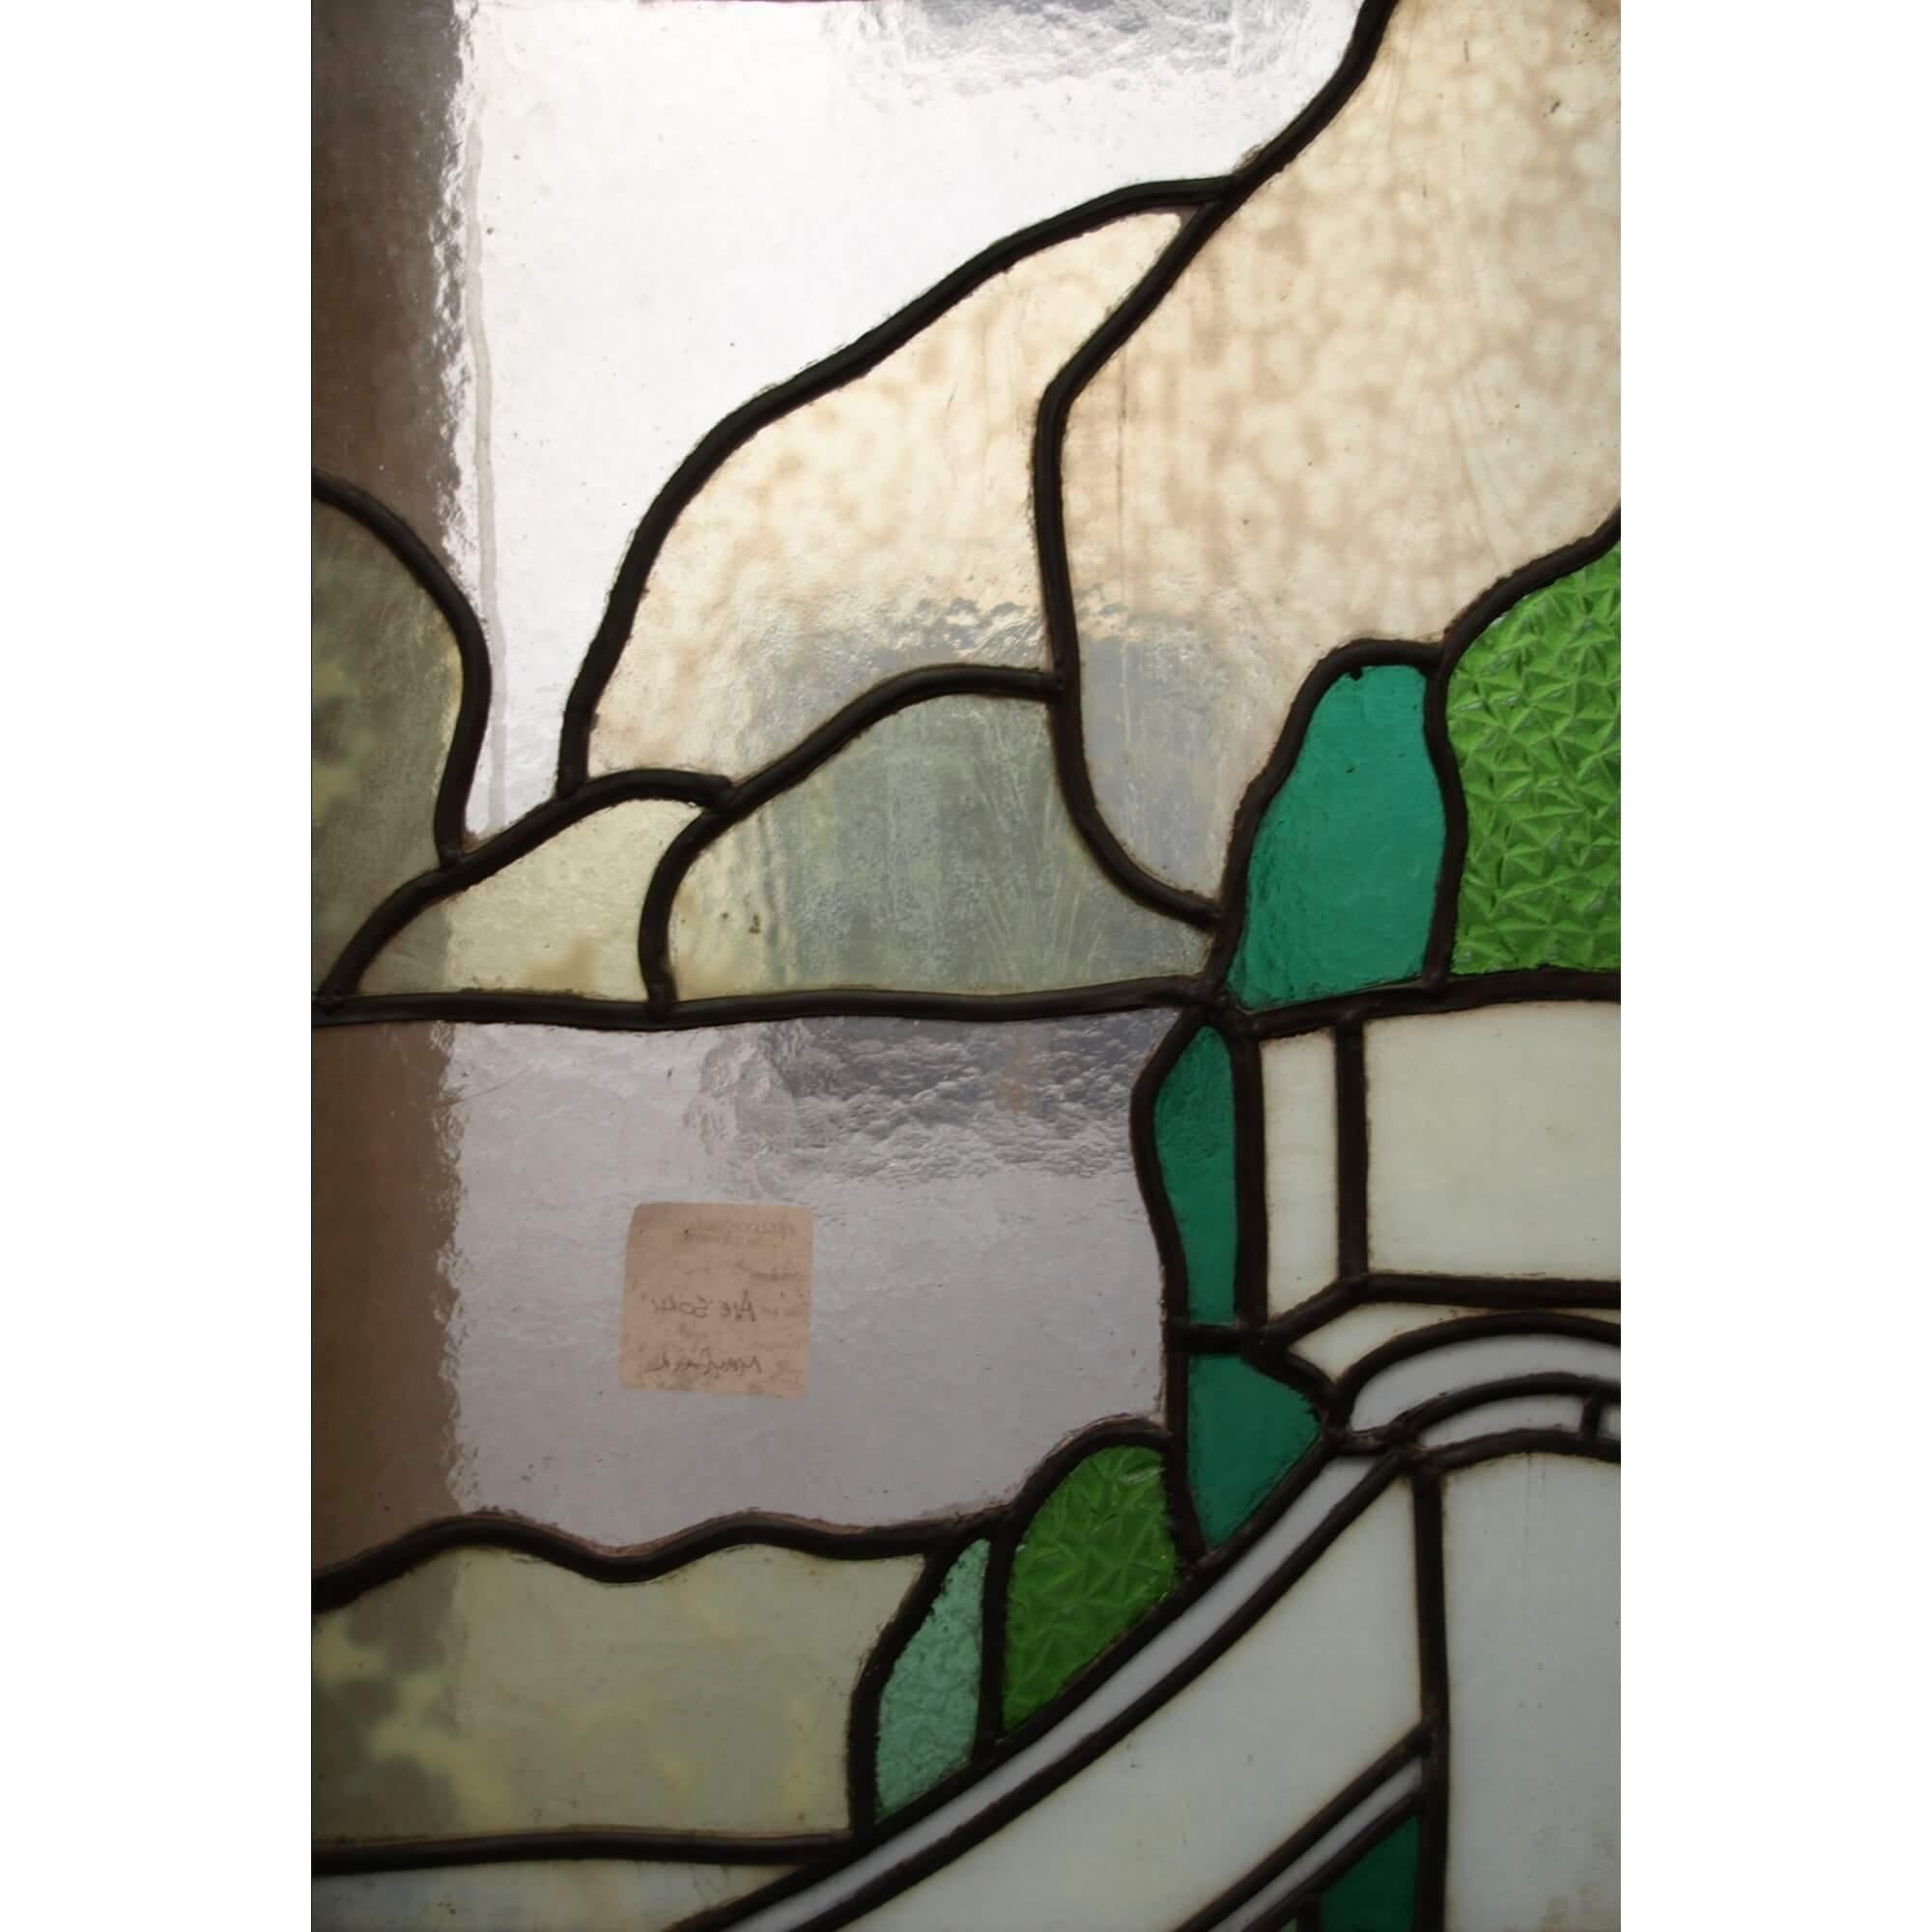 stained glass pocket doors